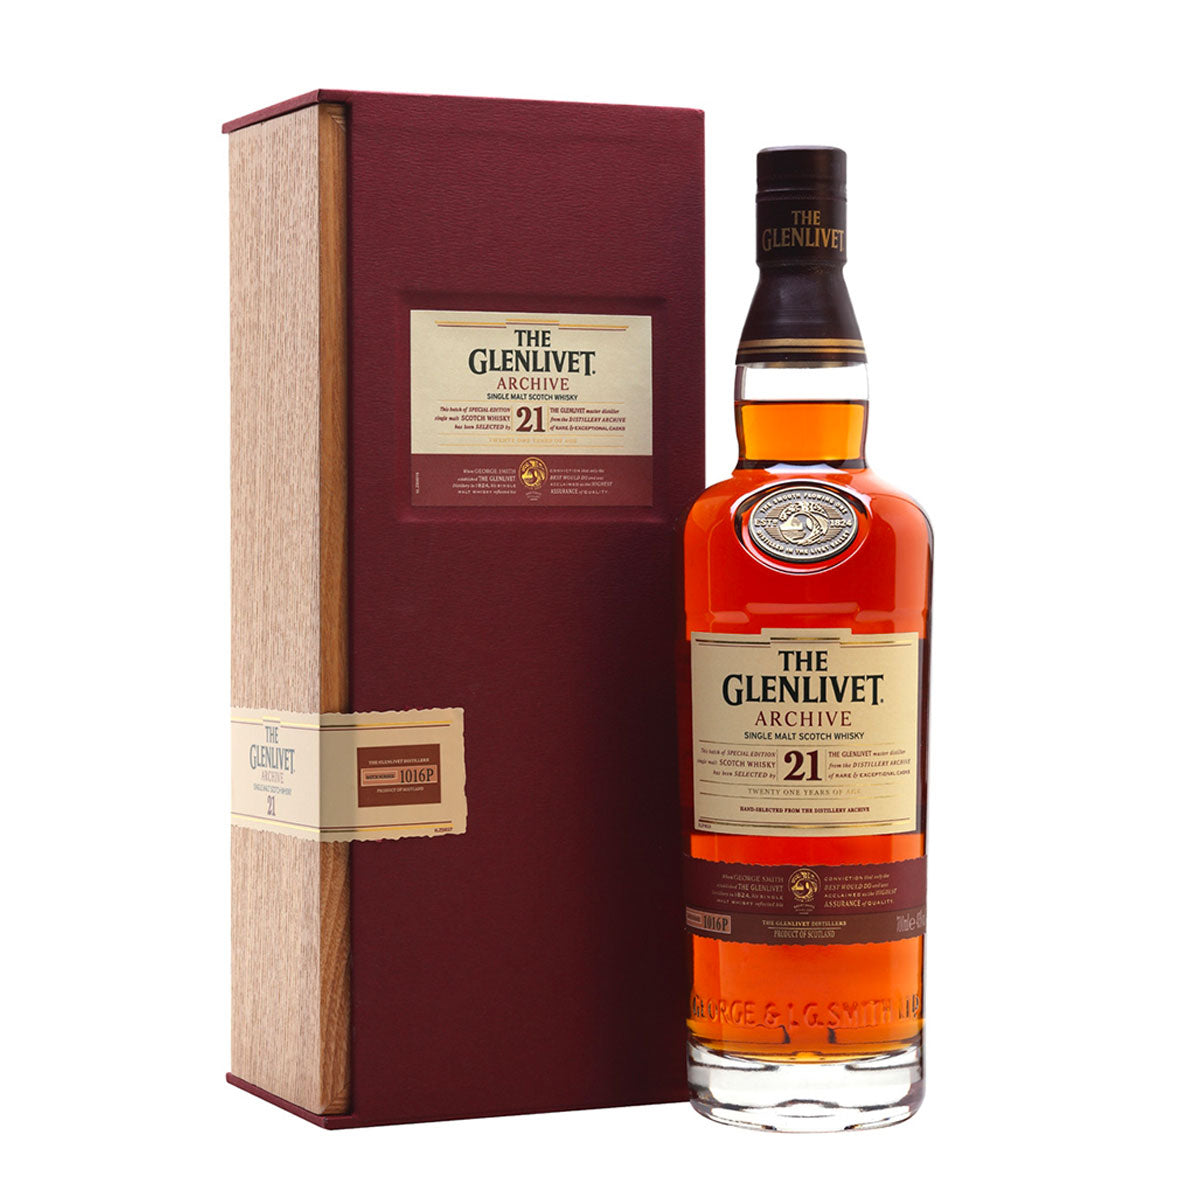 TAG Liquor Stores BC-GLENLIVET ARCHIVE 21 YEAR OLD 750ML